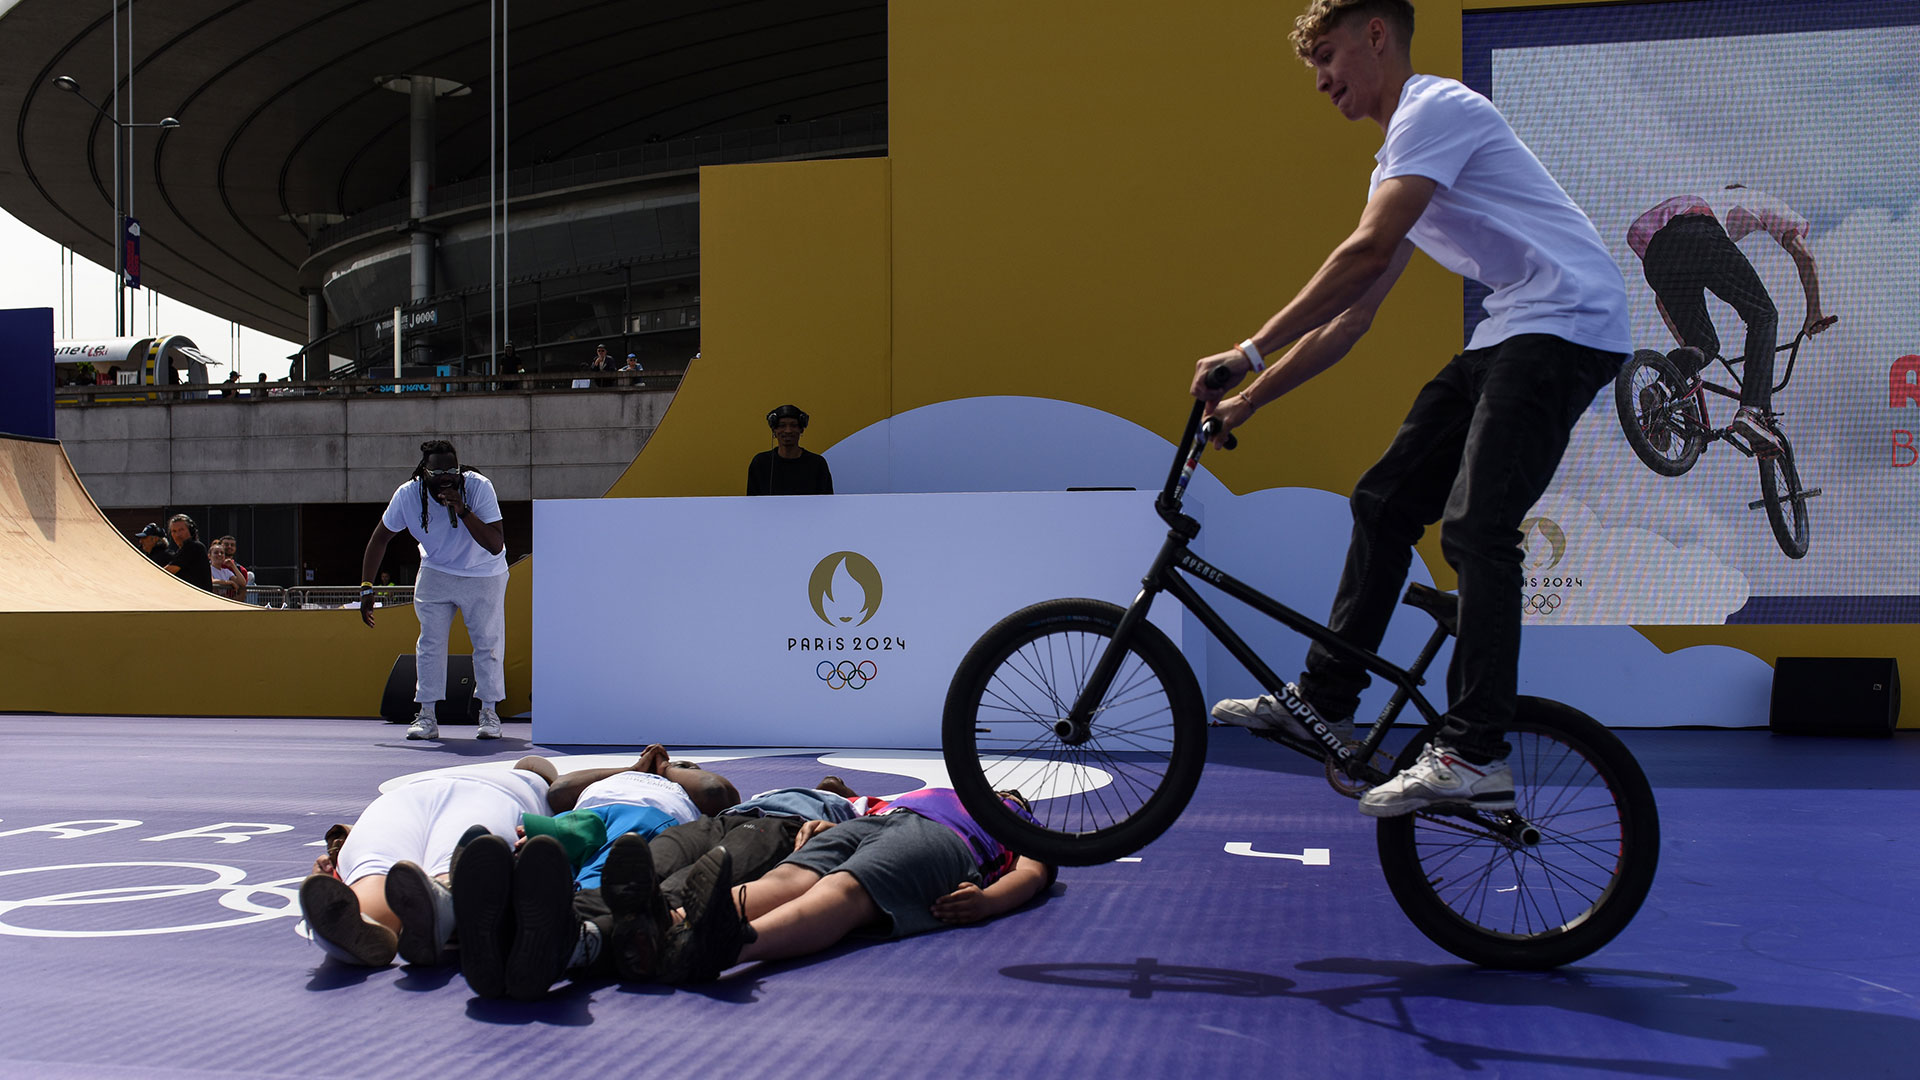 Brave youth participating in BMX bike tricks at Olympic Day (Paris 2024)